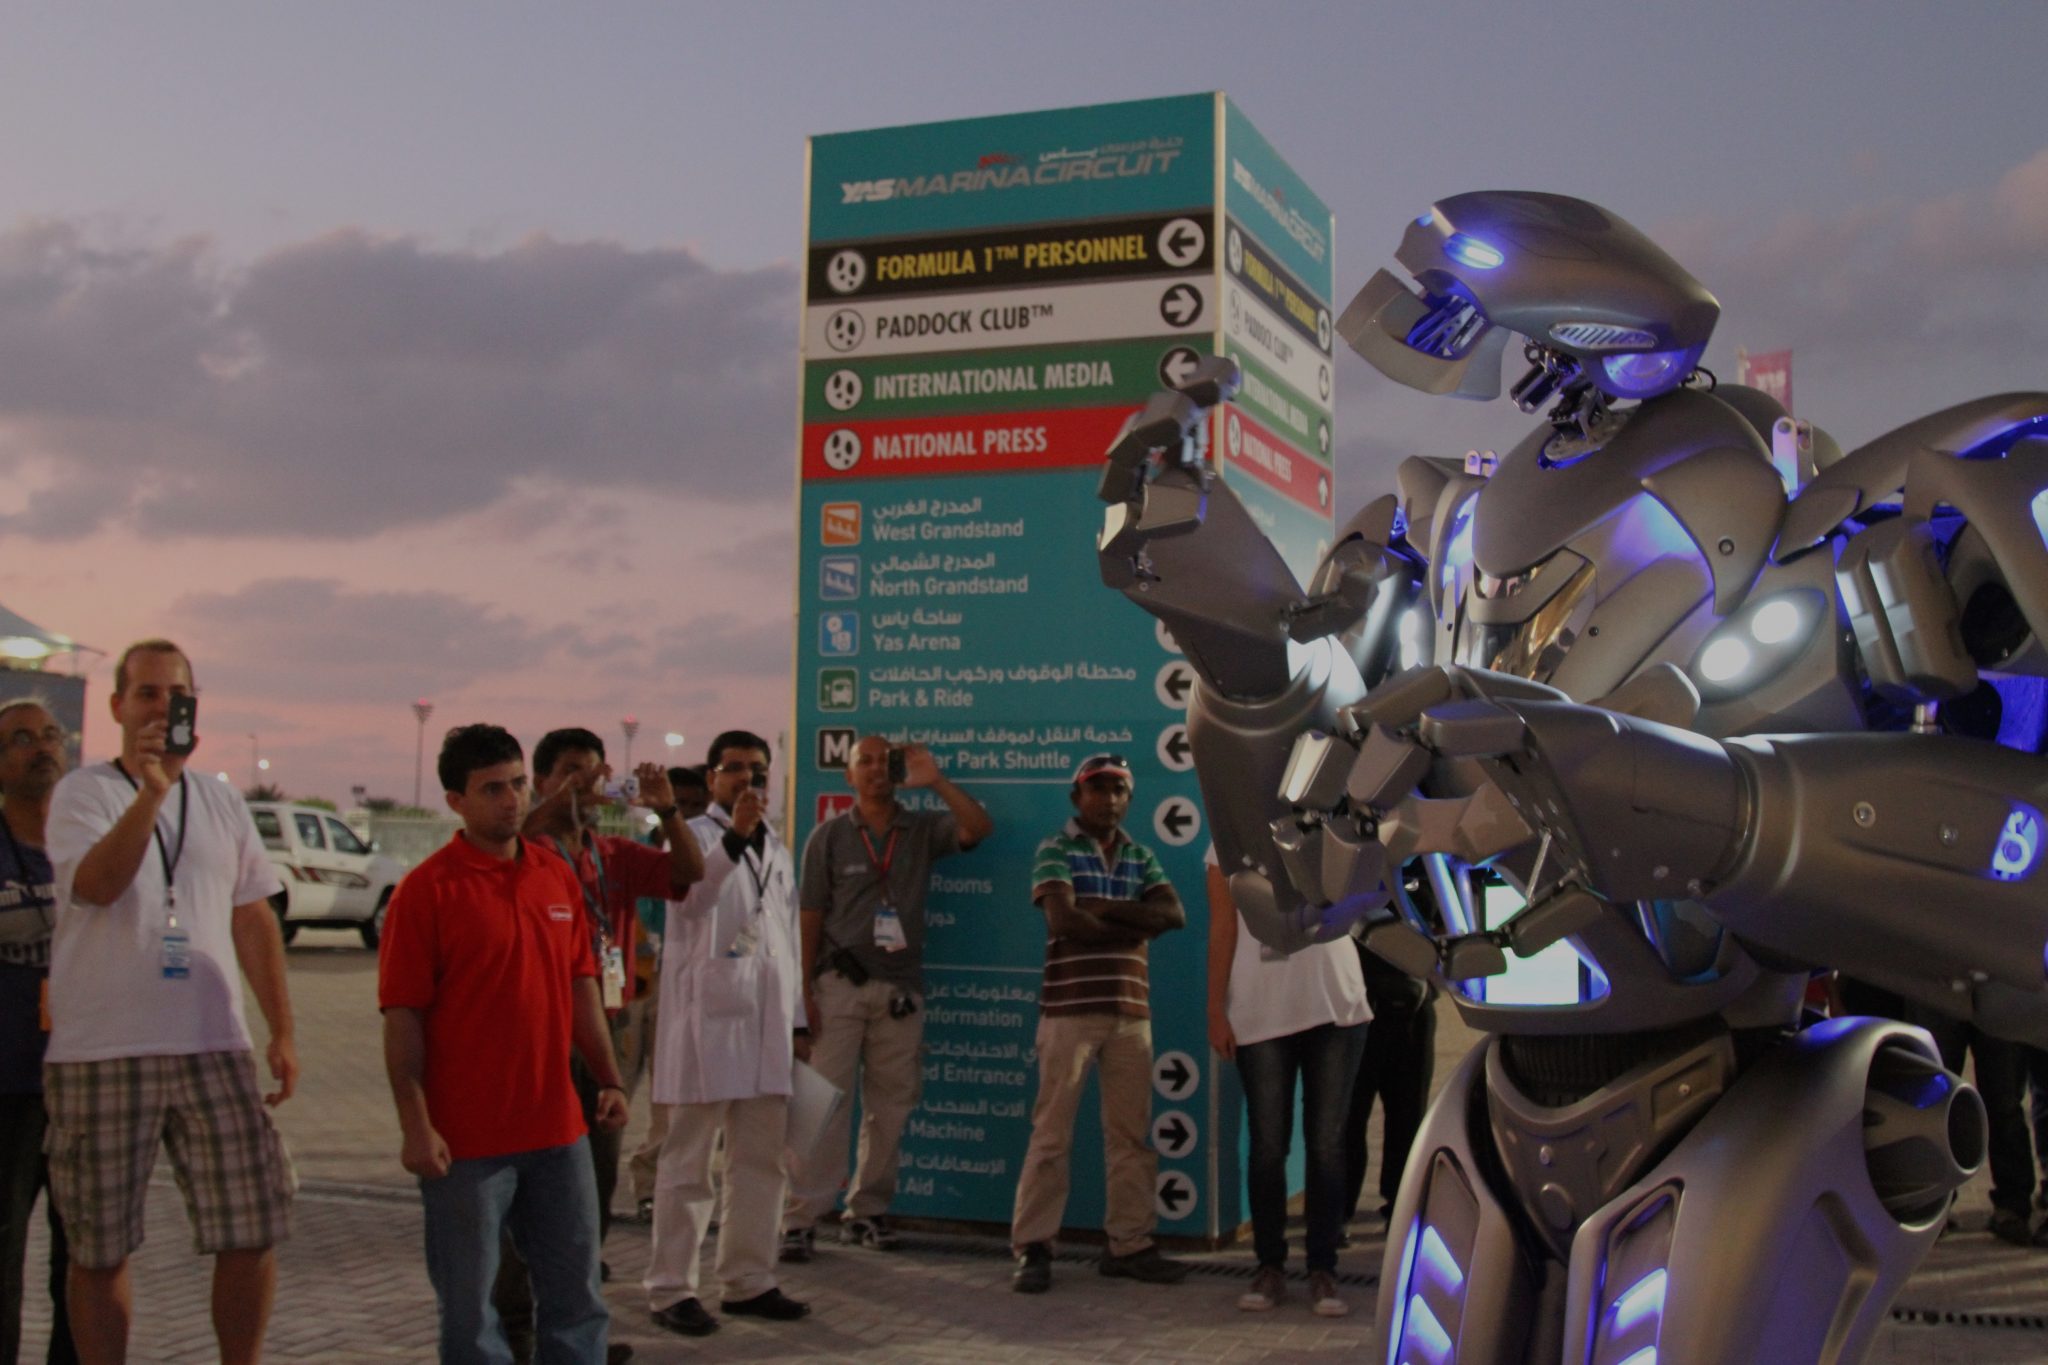 Titan the Robot in the early evening entertaining crowds at the Abu Dhabi F1 Grand Prix.